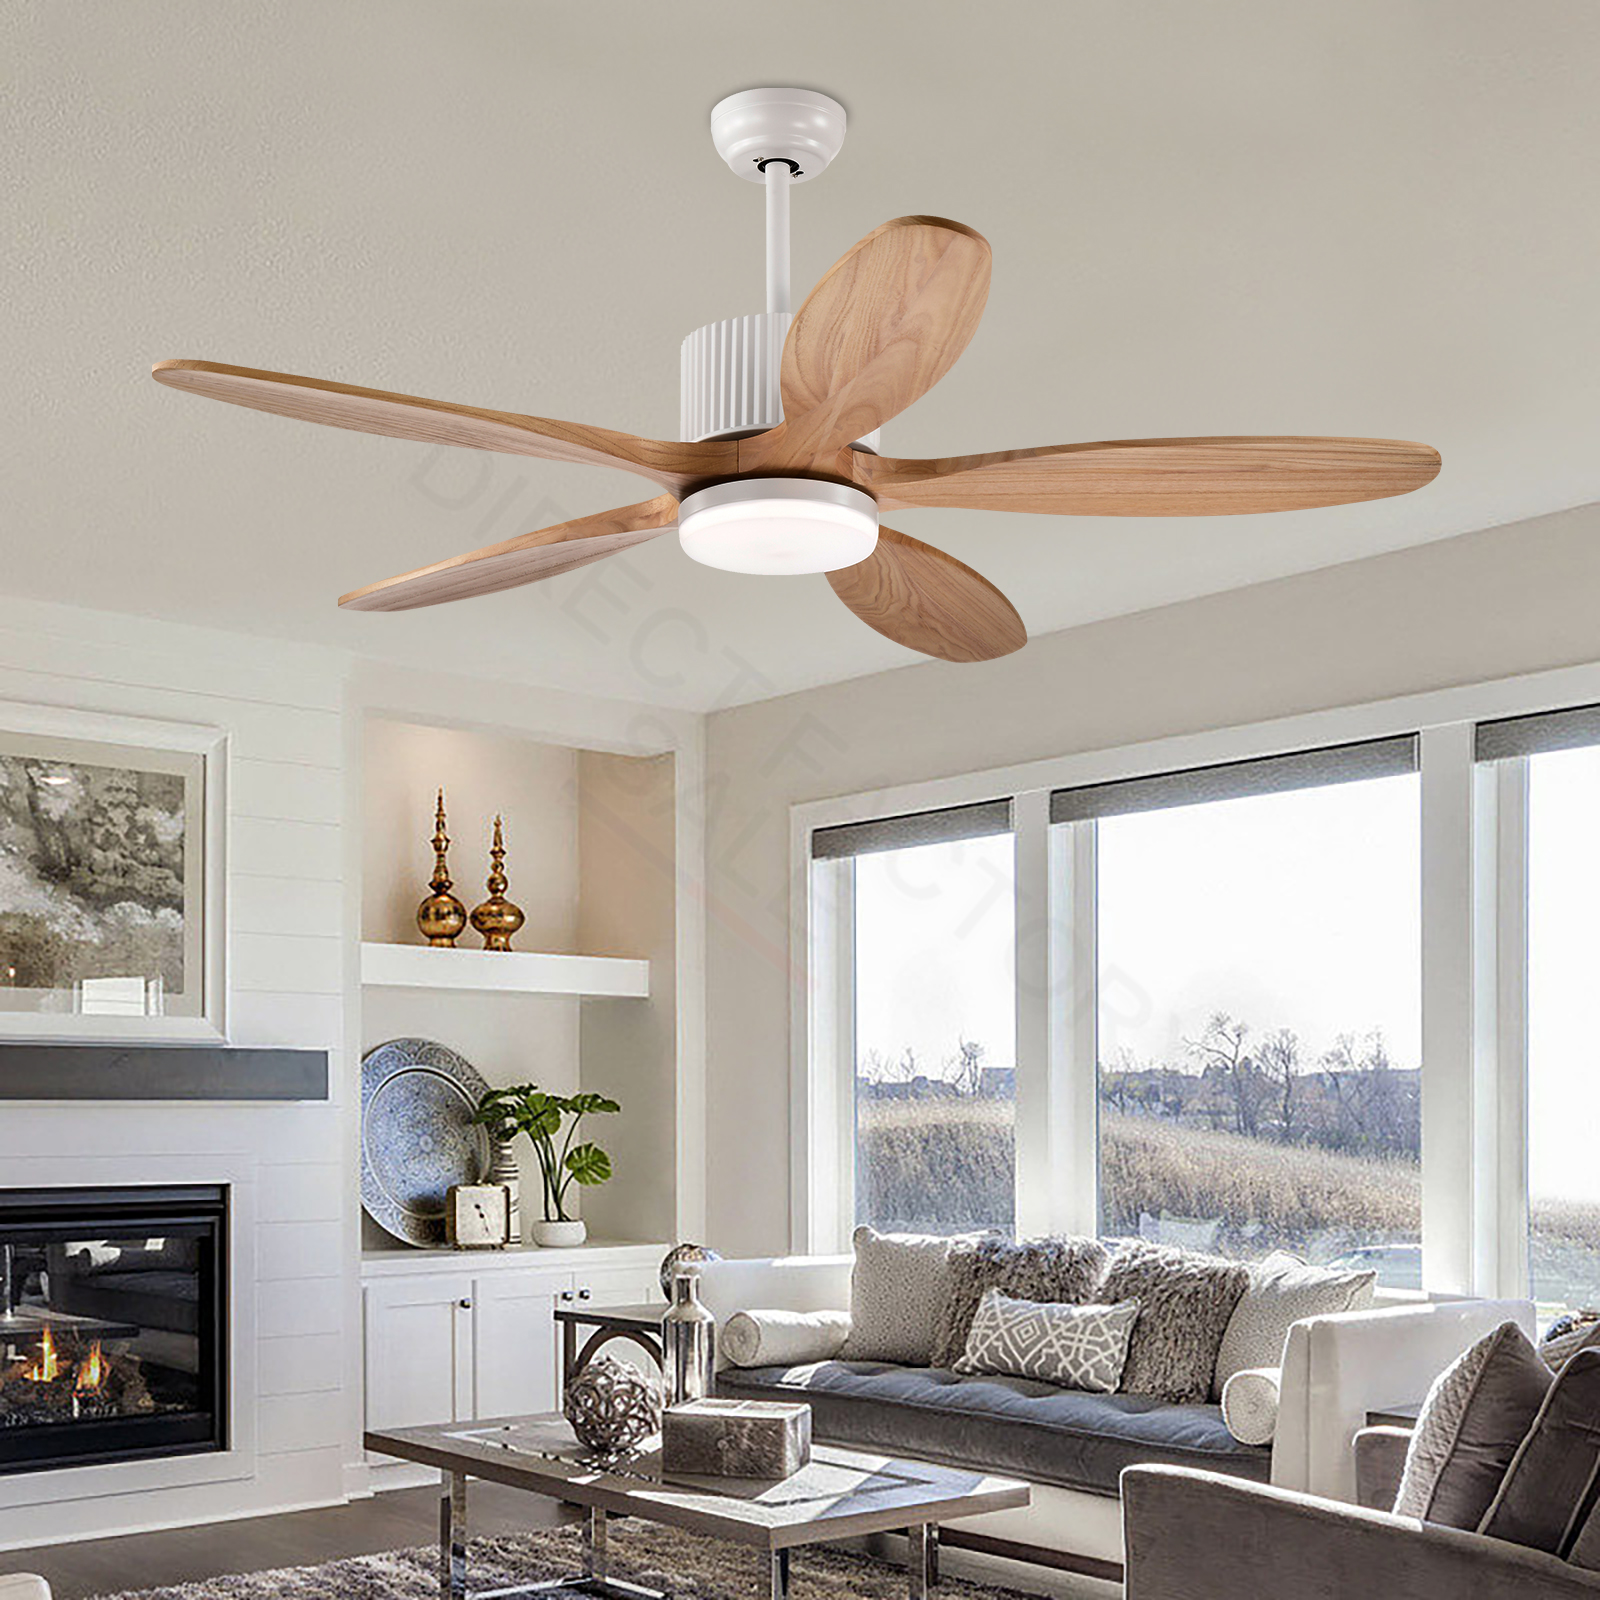 LED Light Ceiling Fan Reversible DC Motor Wooden Blades Remote Control 52"